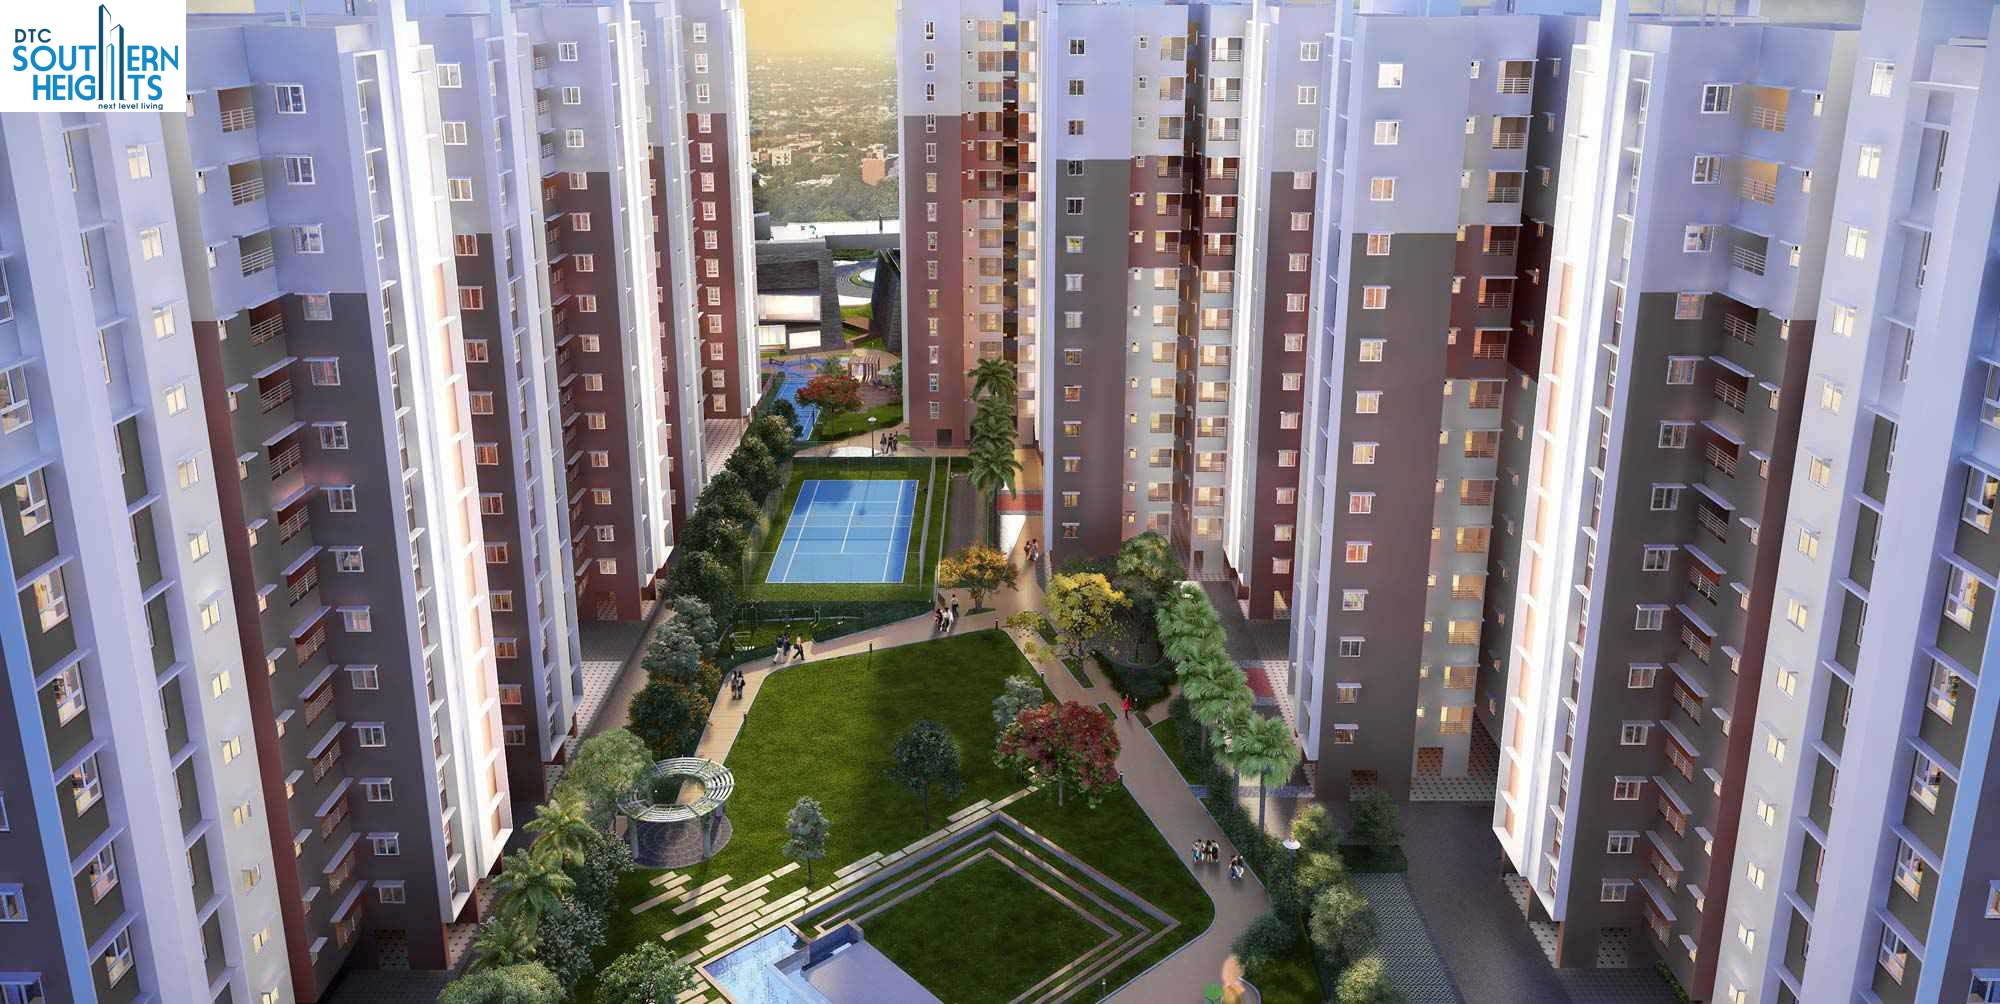 DTC Southern Heights is one of the biggest projects in South West Kolkata Update